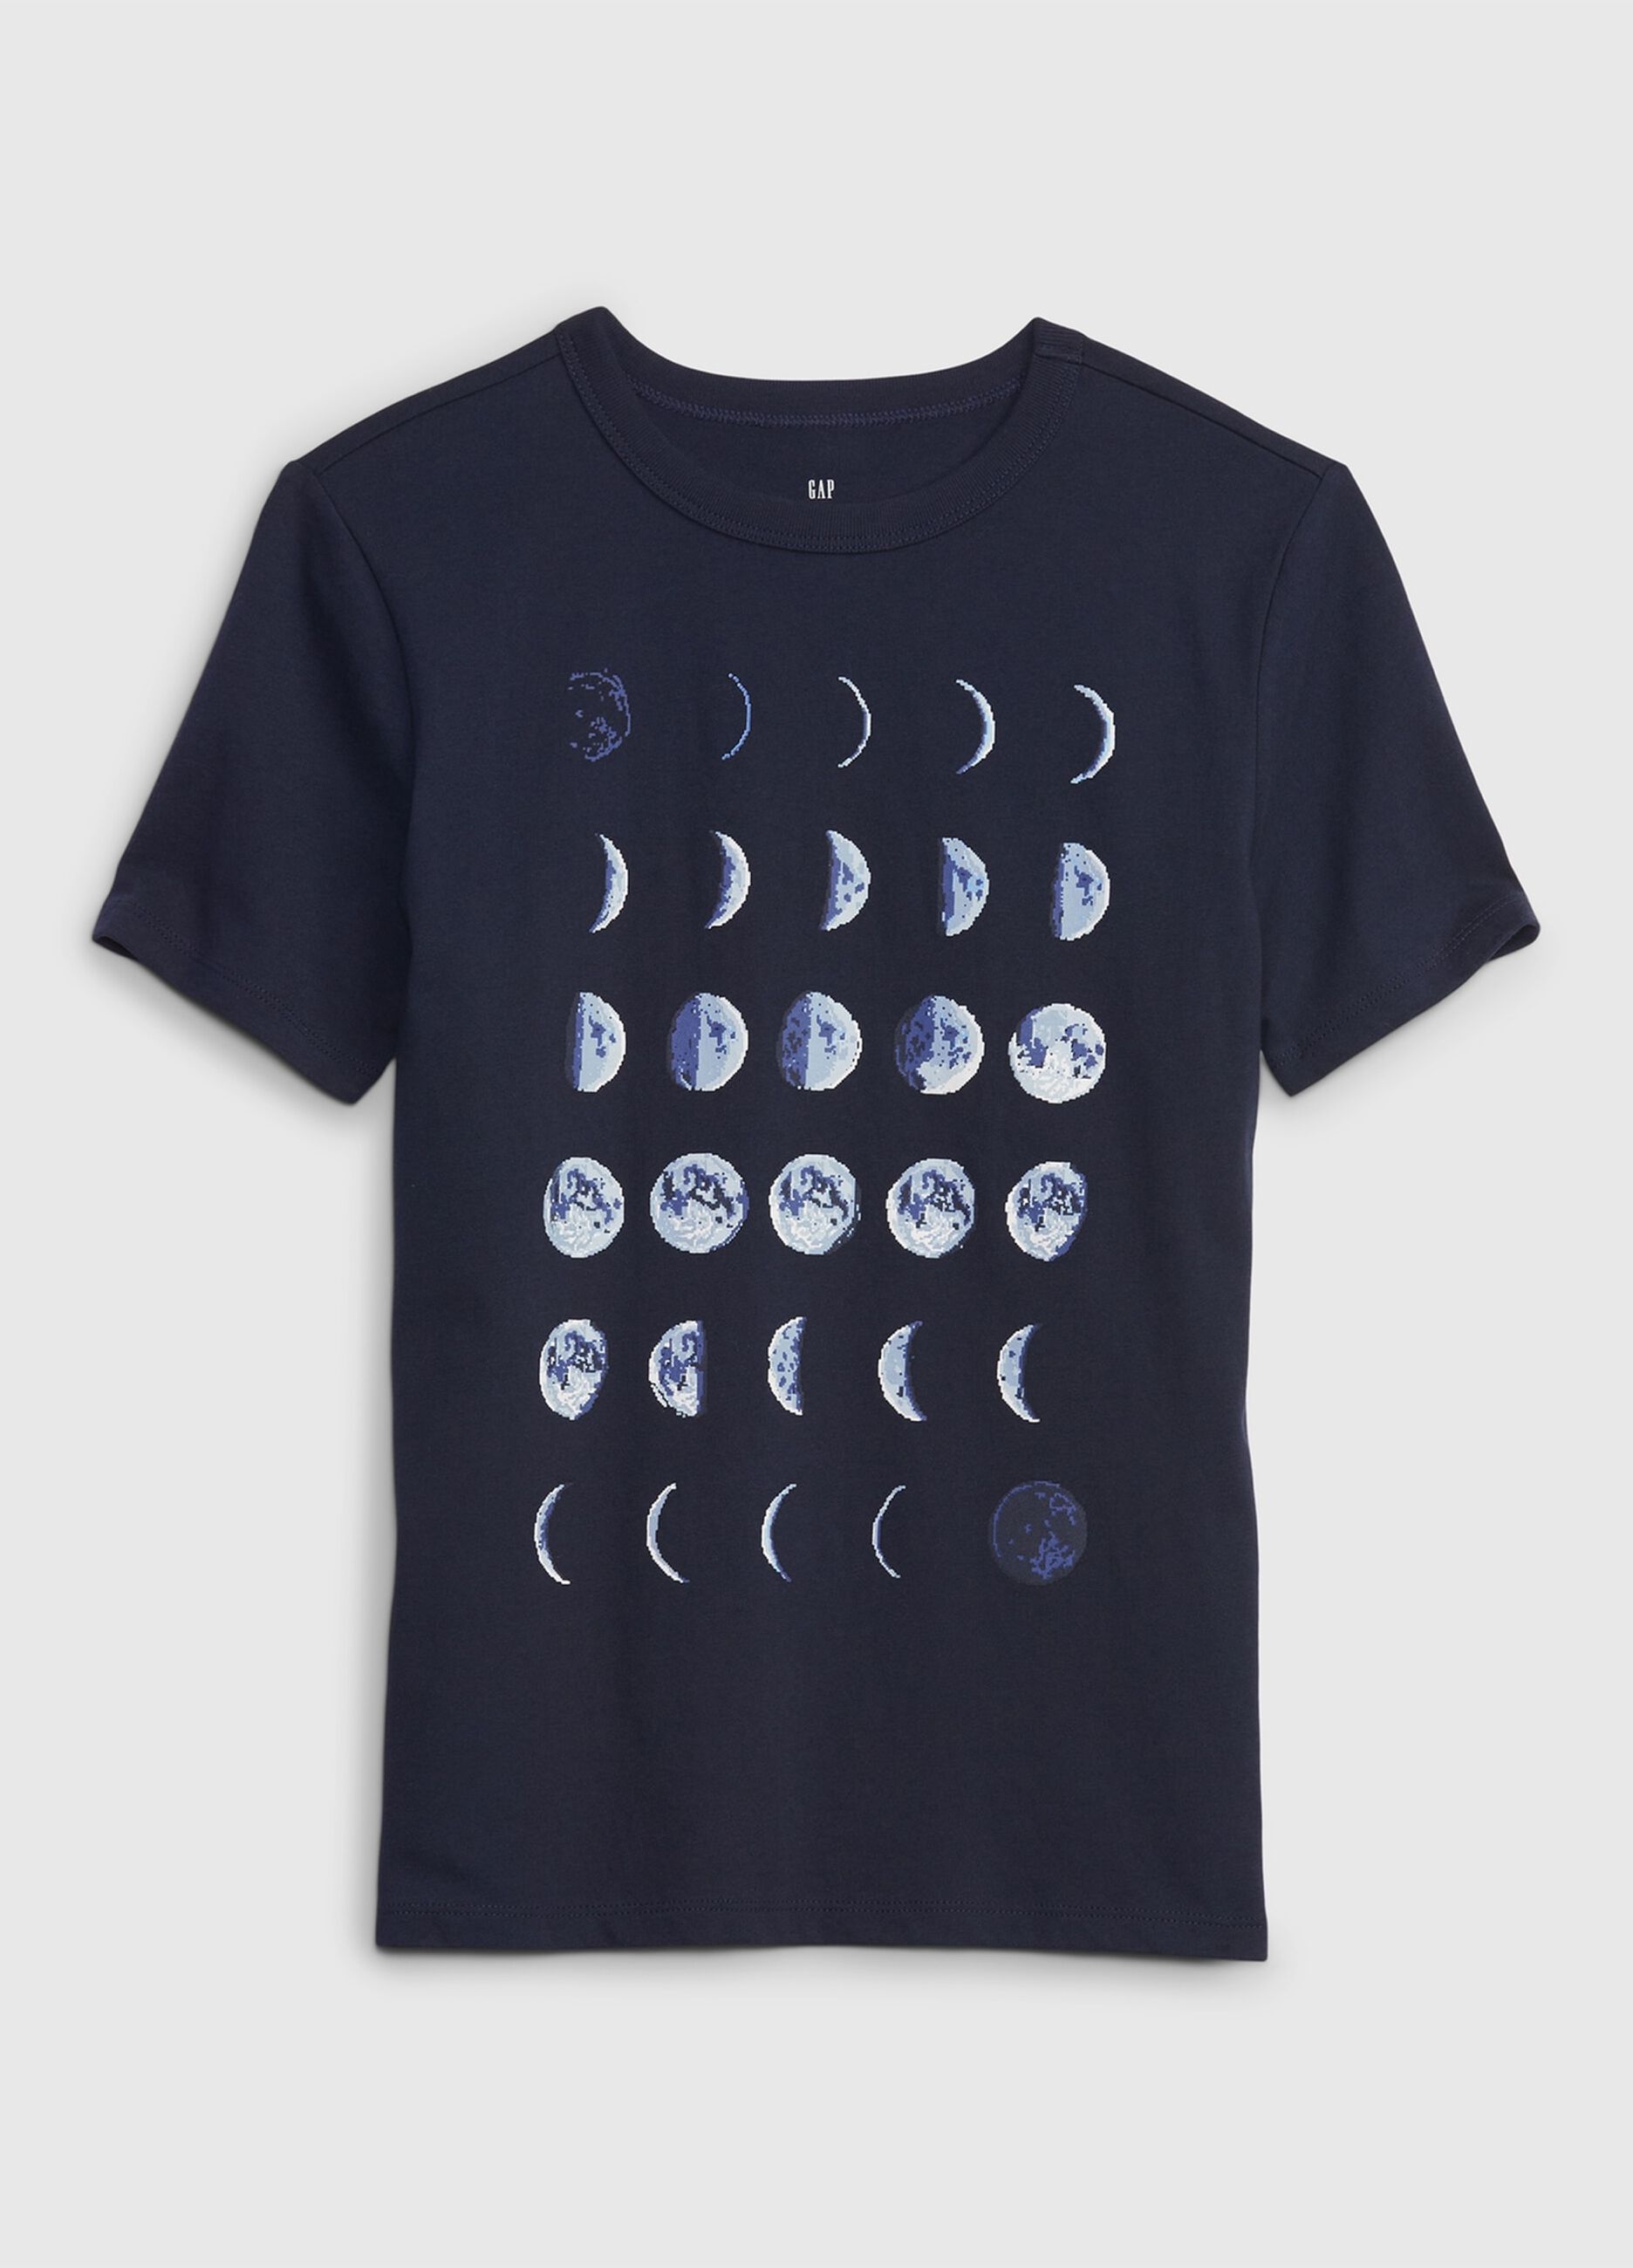 Cotton T-shirt with moon phases print